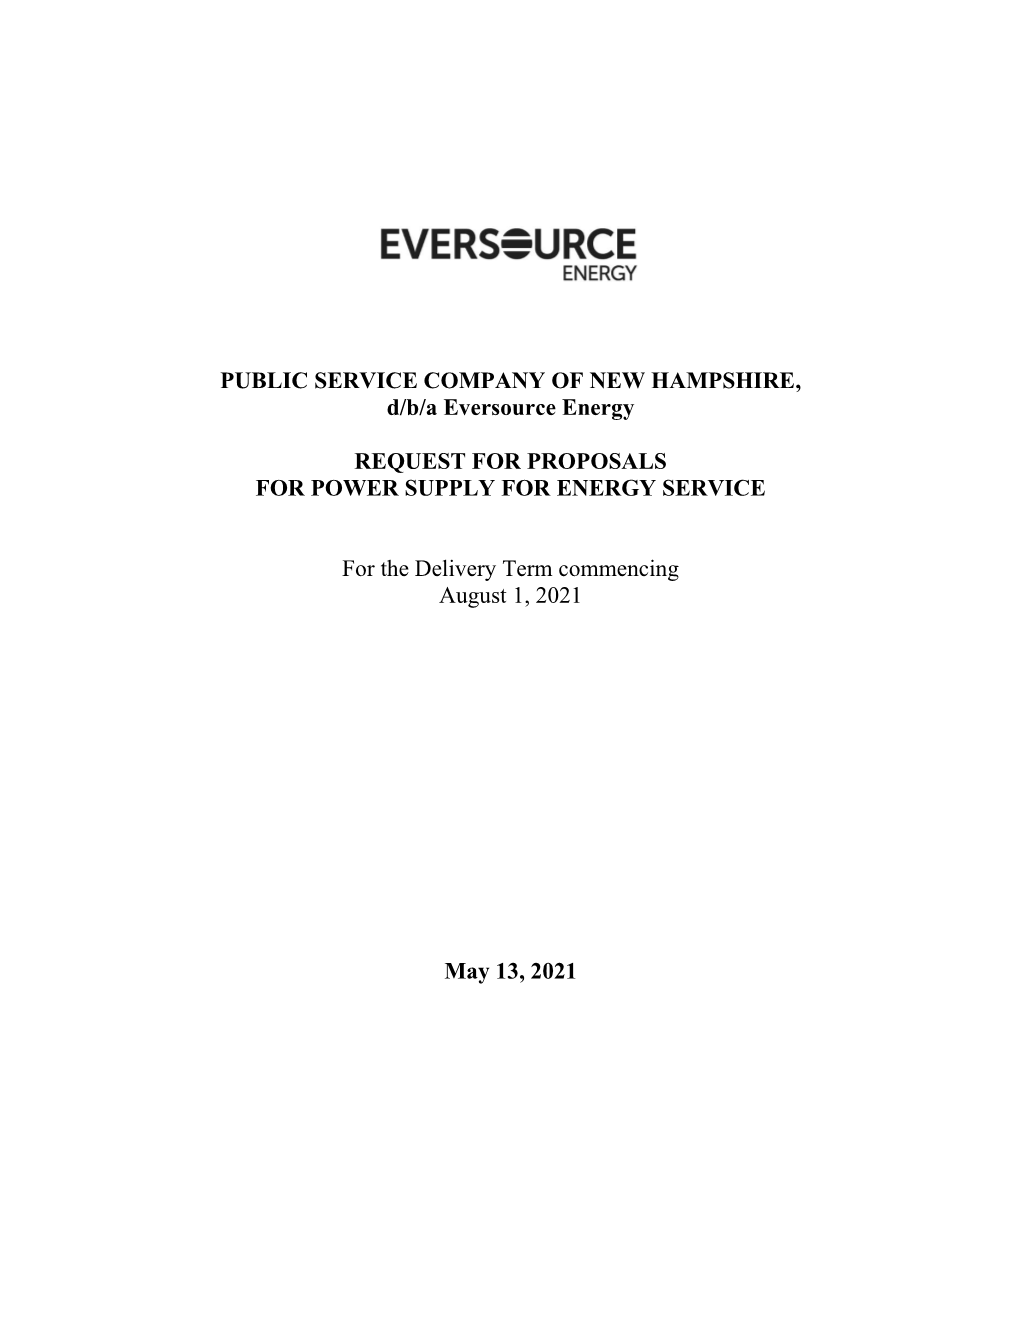 PUBLIC SERVICE COMPANY of NEW HAMPSHIRE, D/B/A Eversource Energy